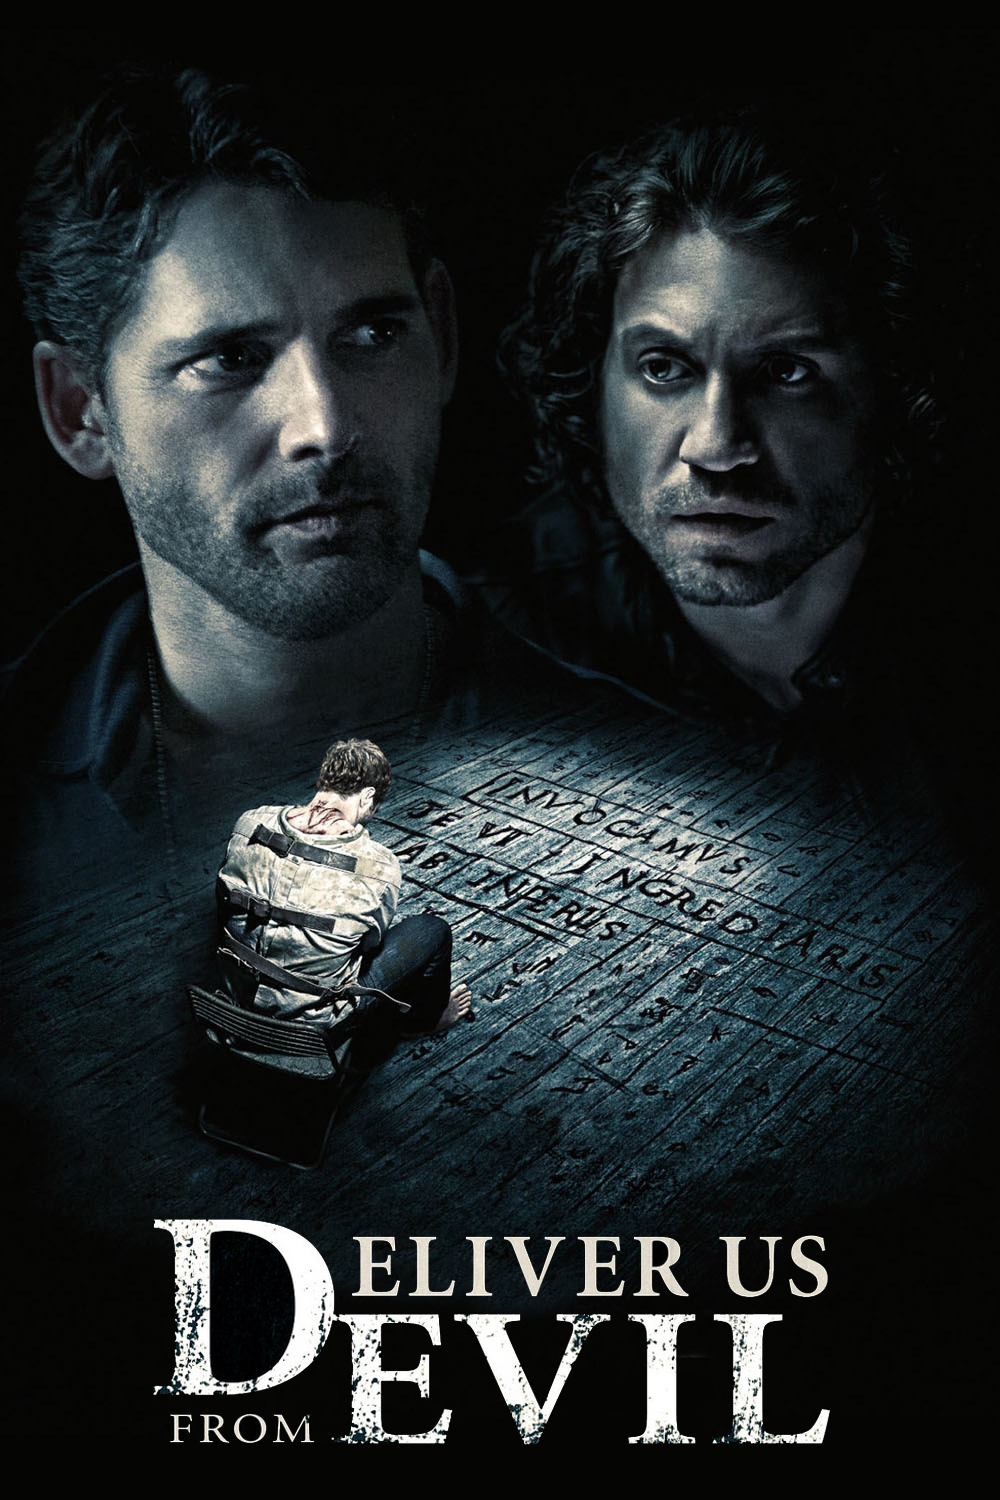 Poster for the movie "Deliver Us from Evil"